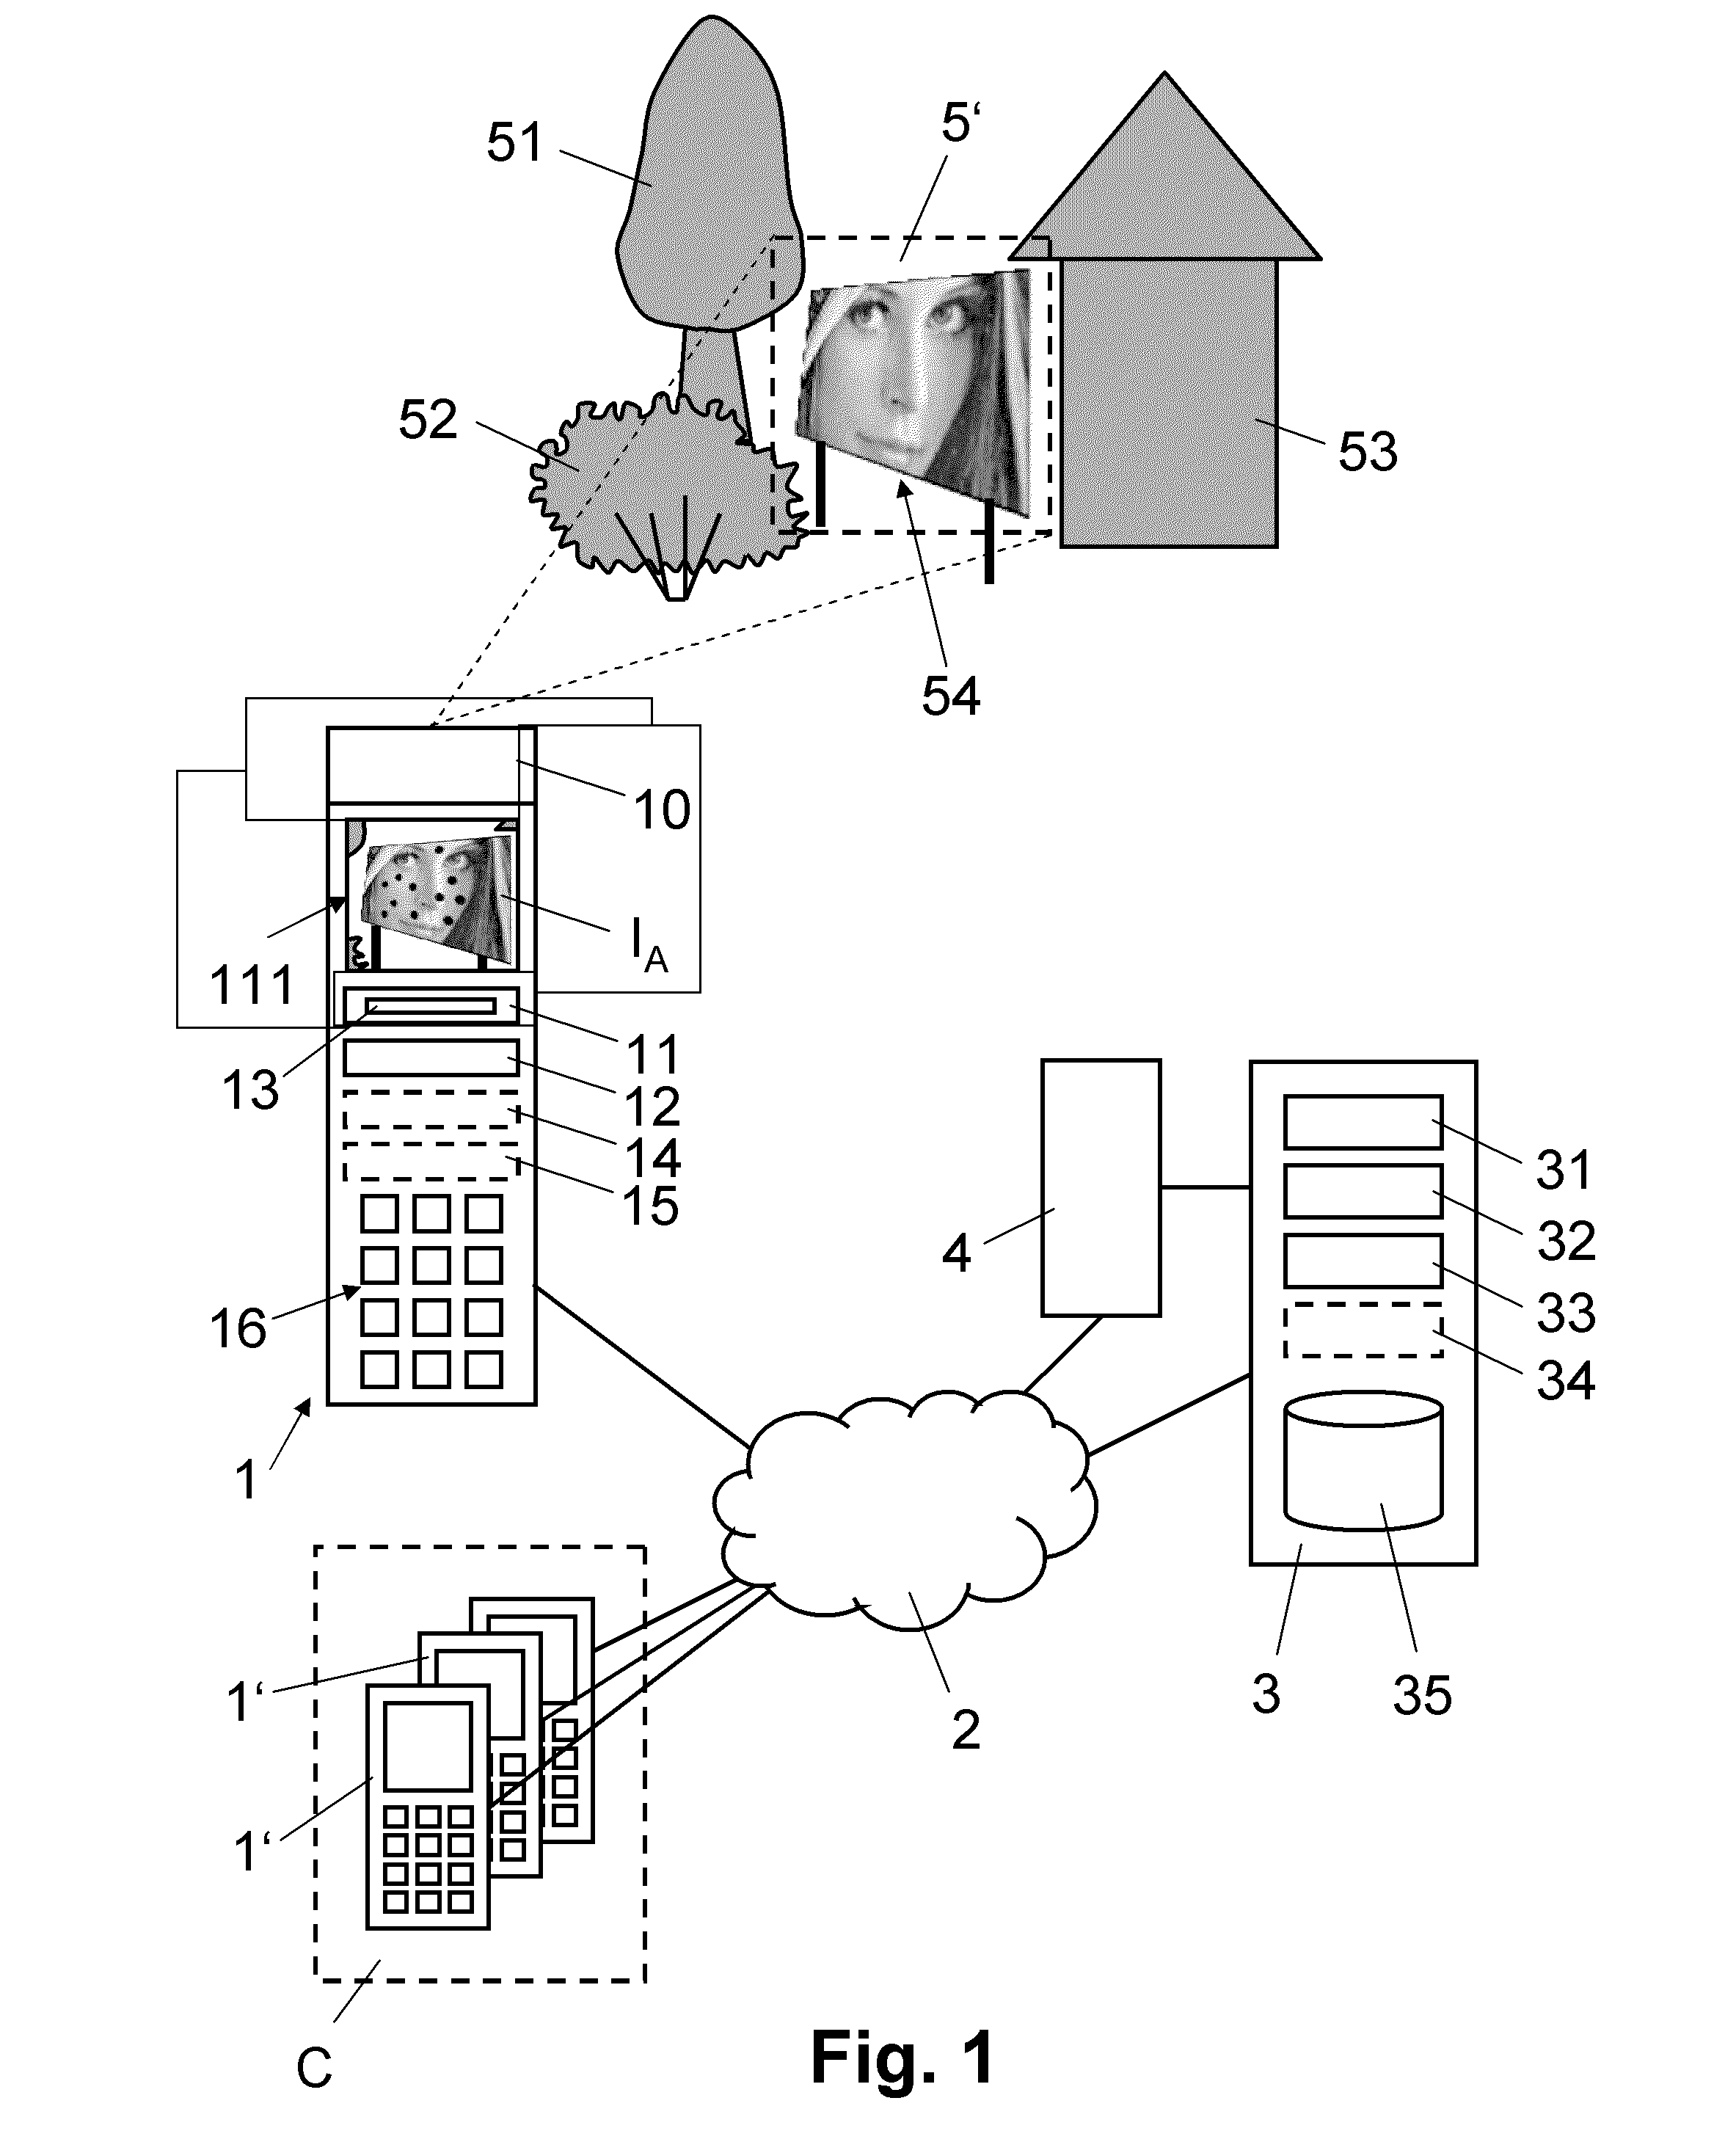 Method and system for image-based information retrieval